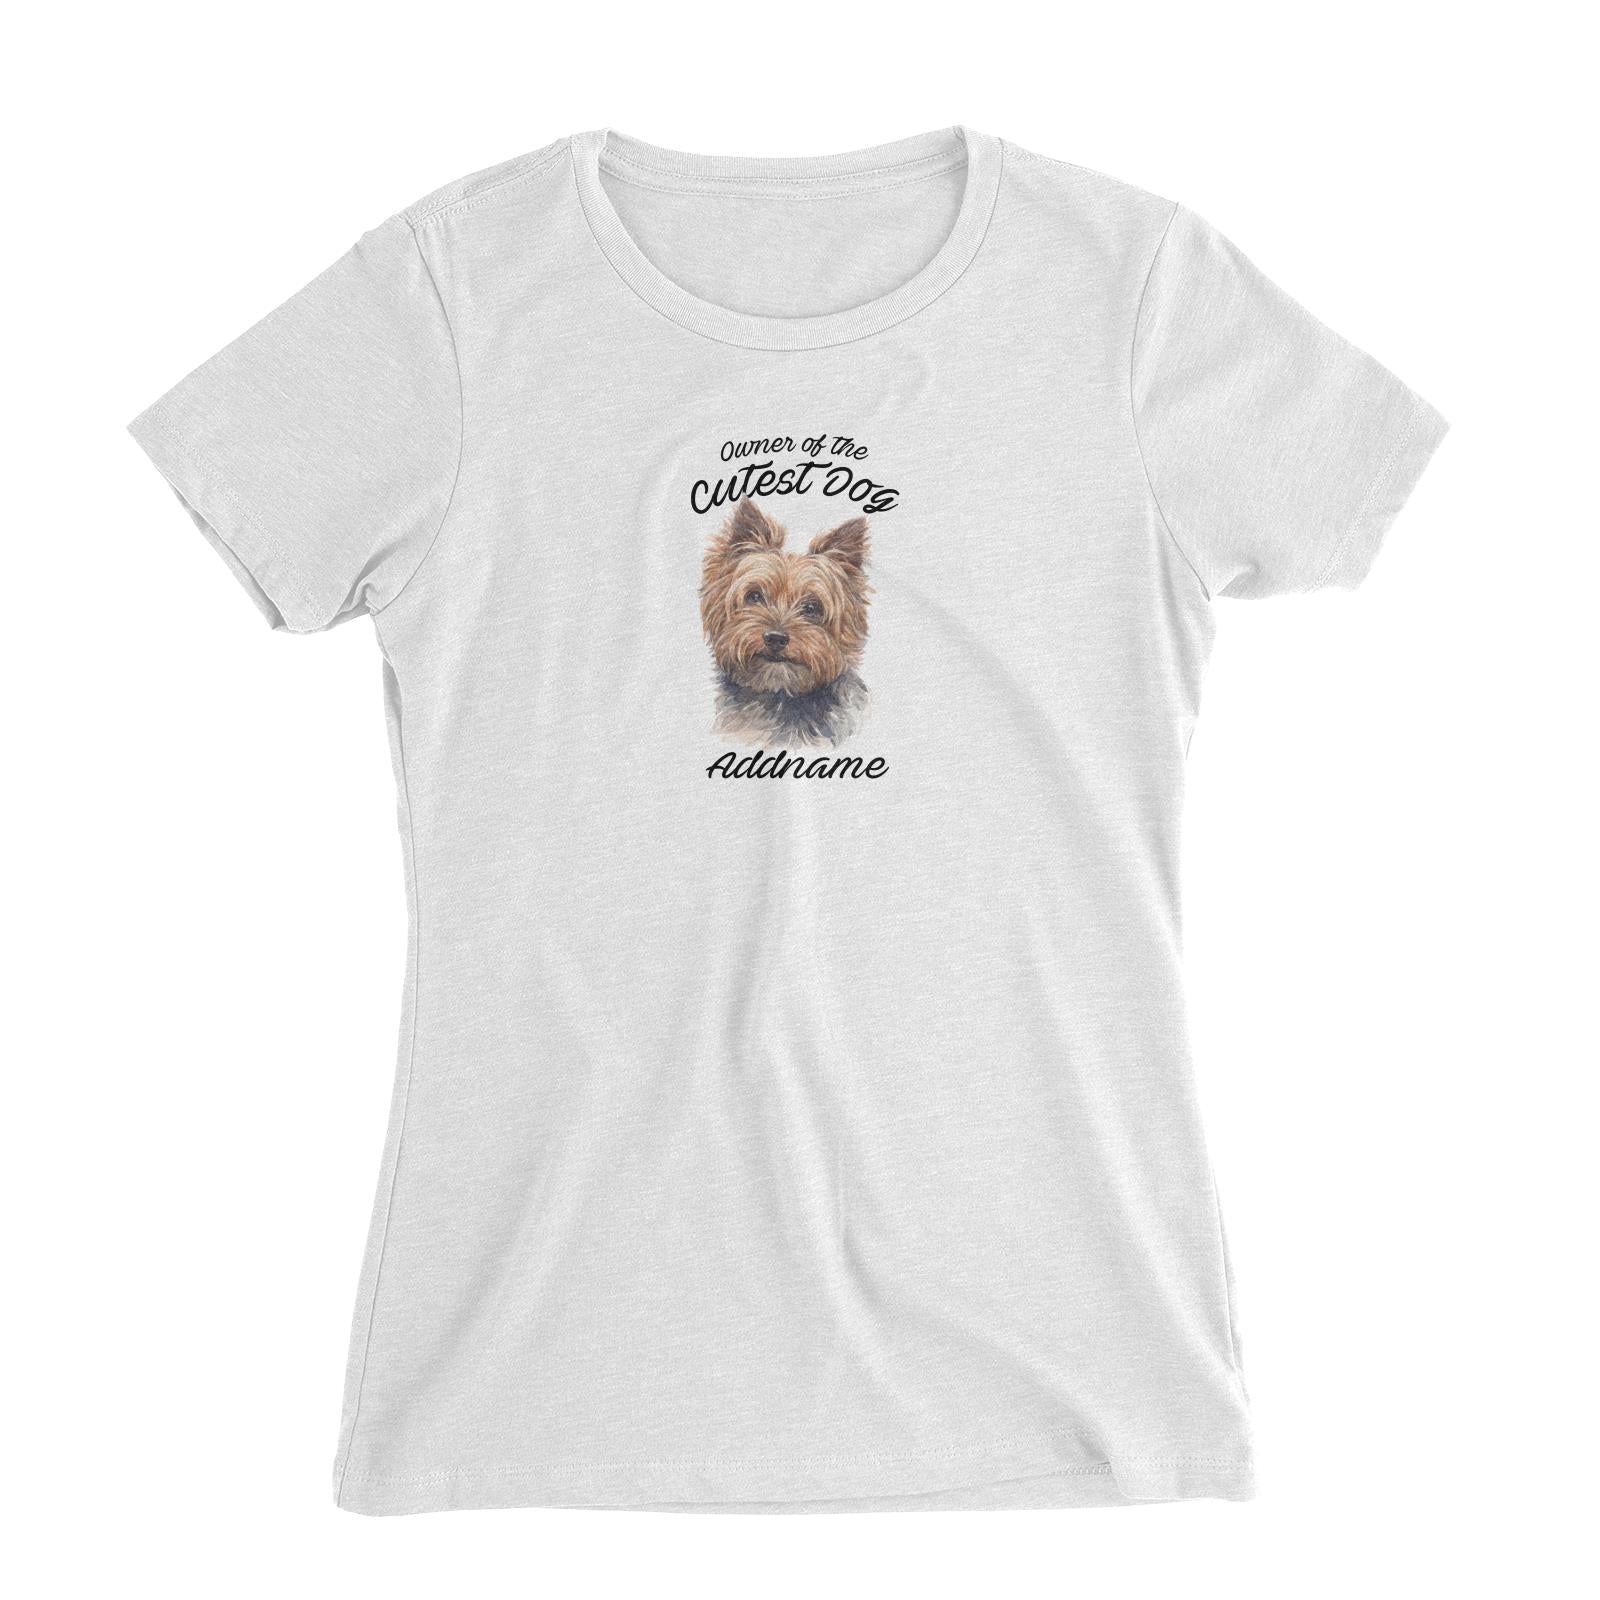 Watercolor Dog Owner Of The Cutest Dog Yorkshire Terrier Addname Women's Slim Fit T-Shirt